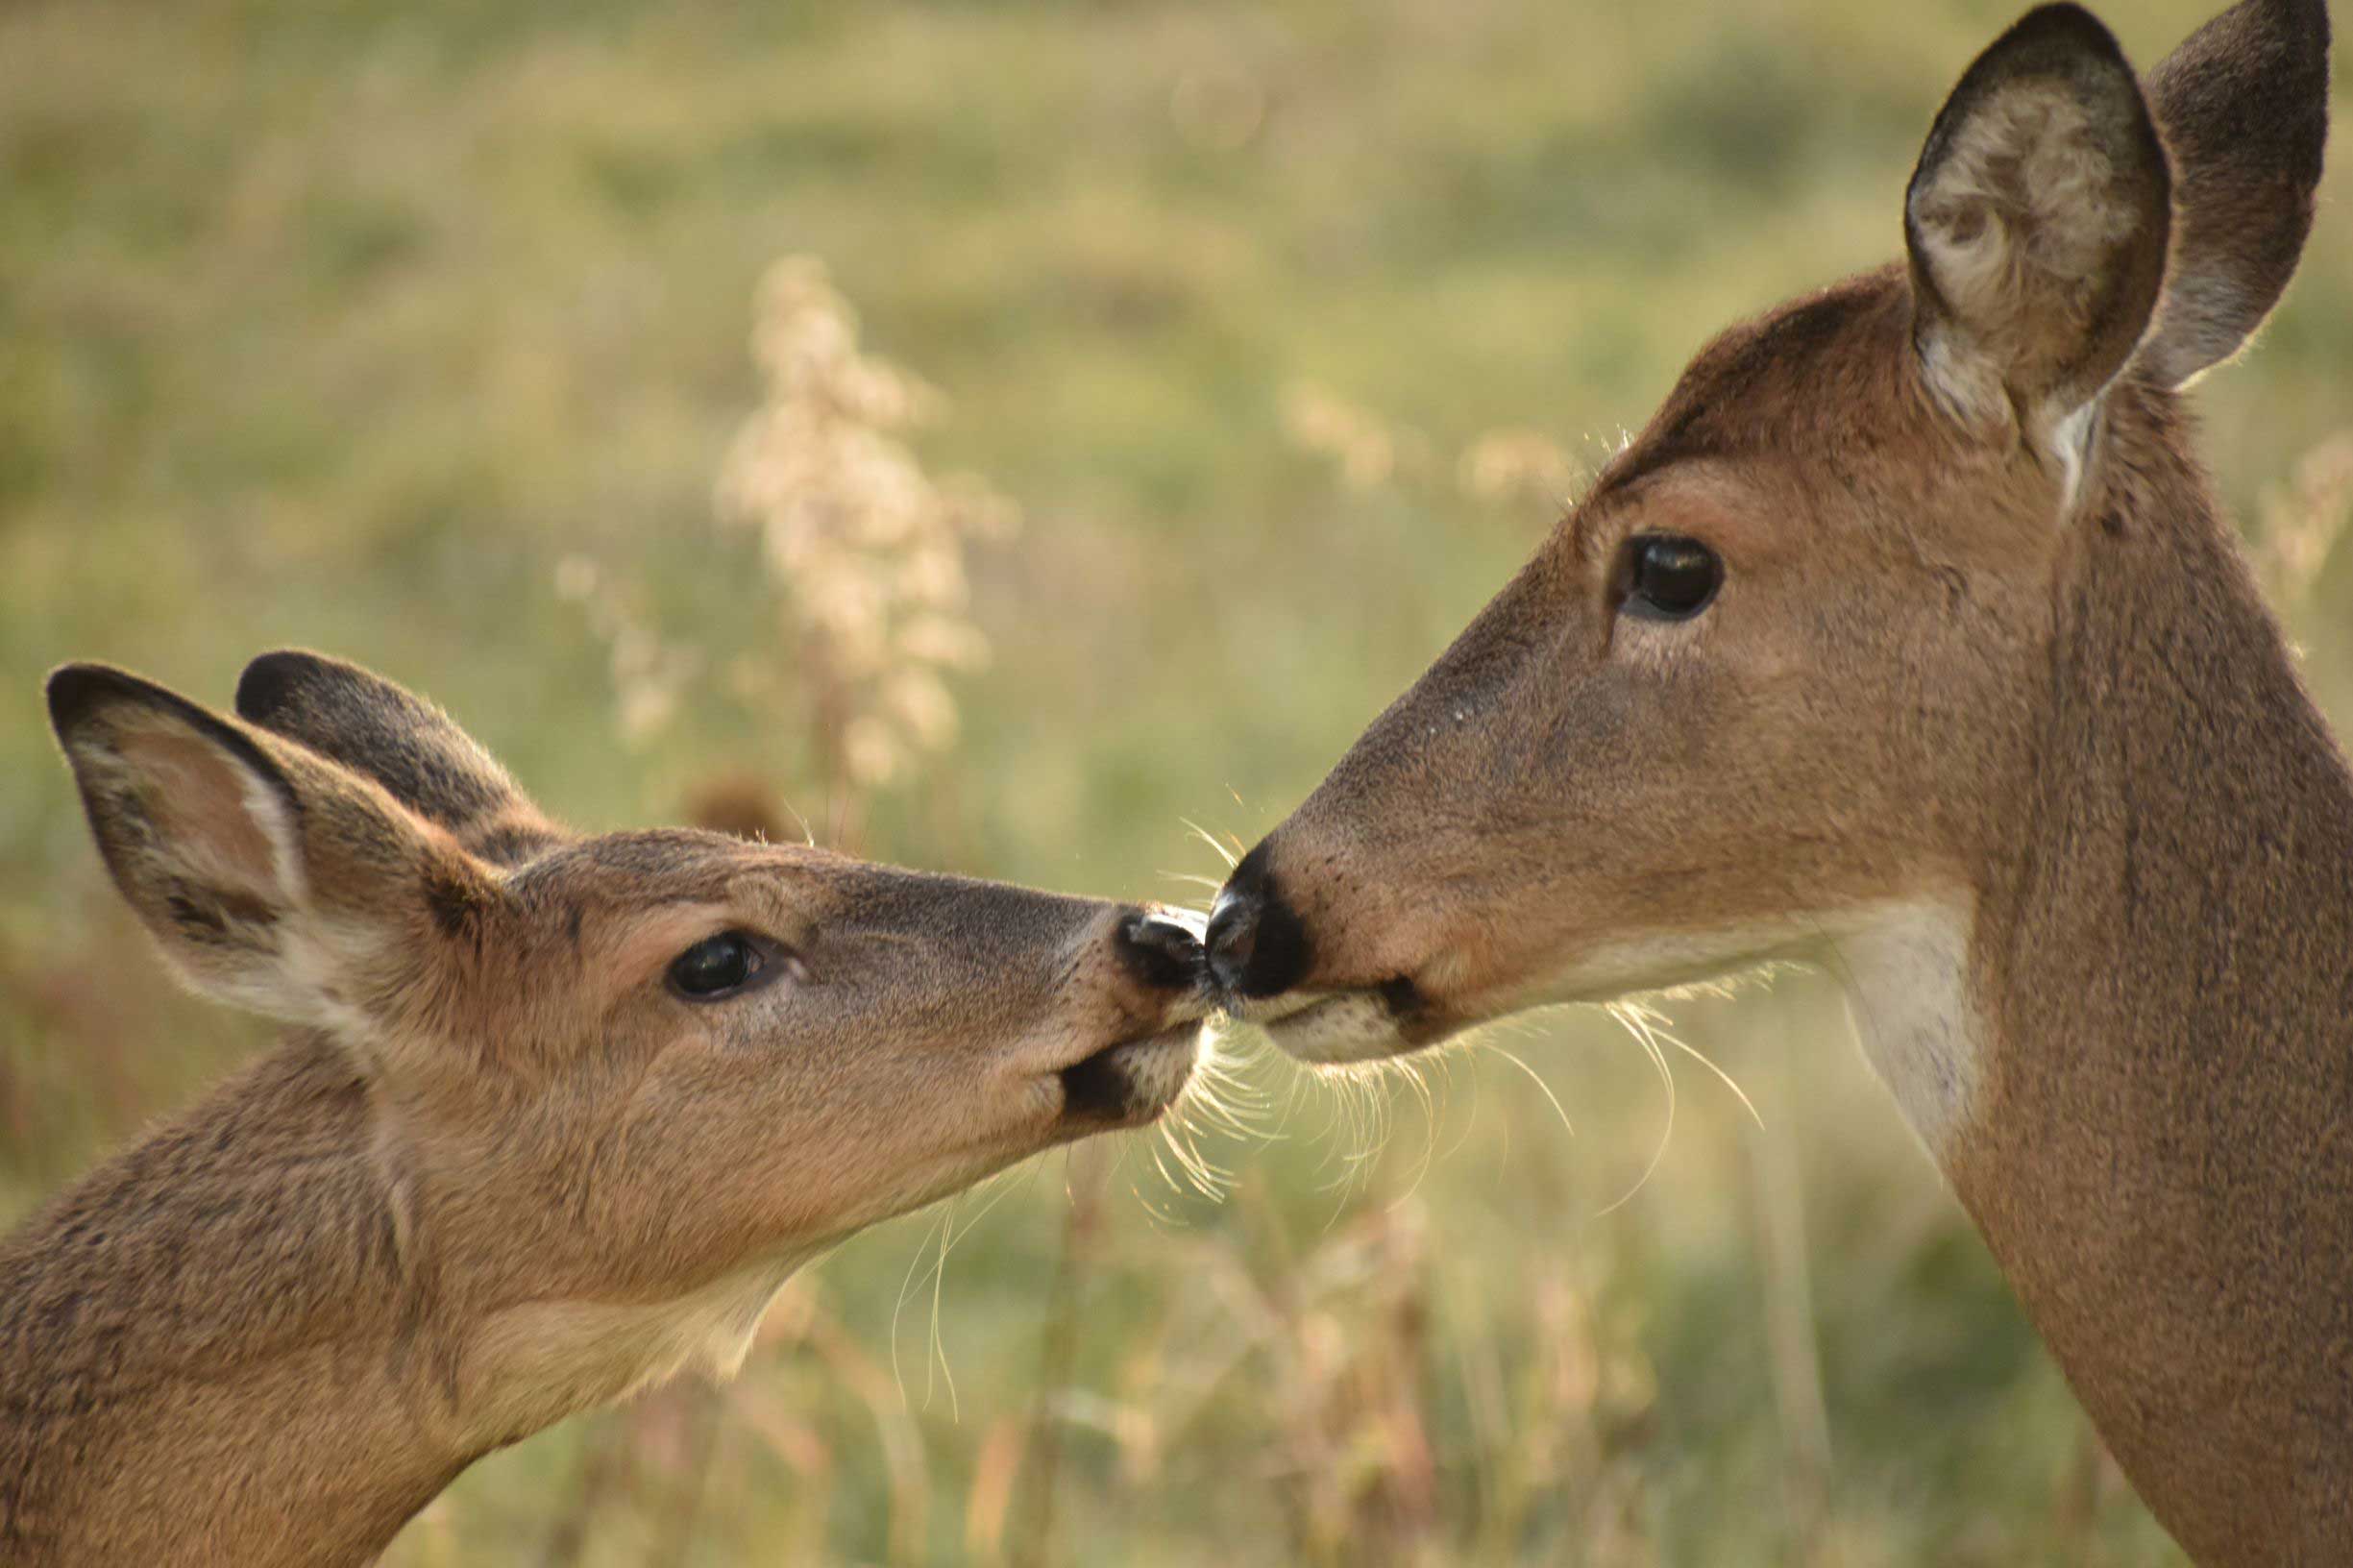 Two deer touching noses in a field.